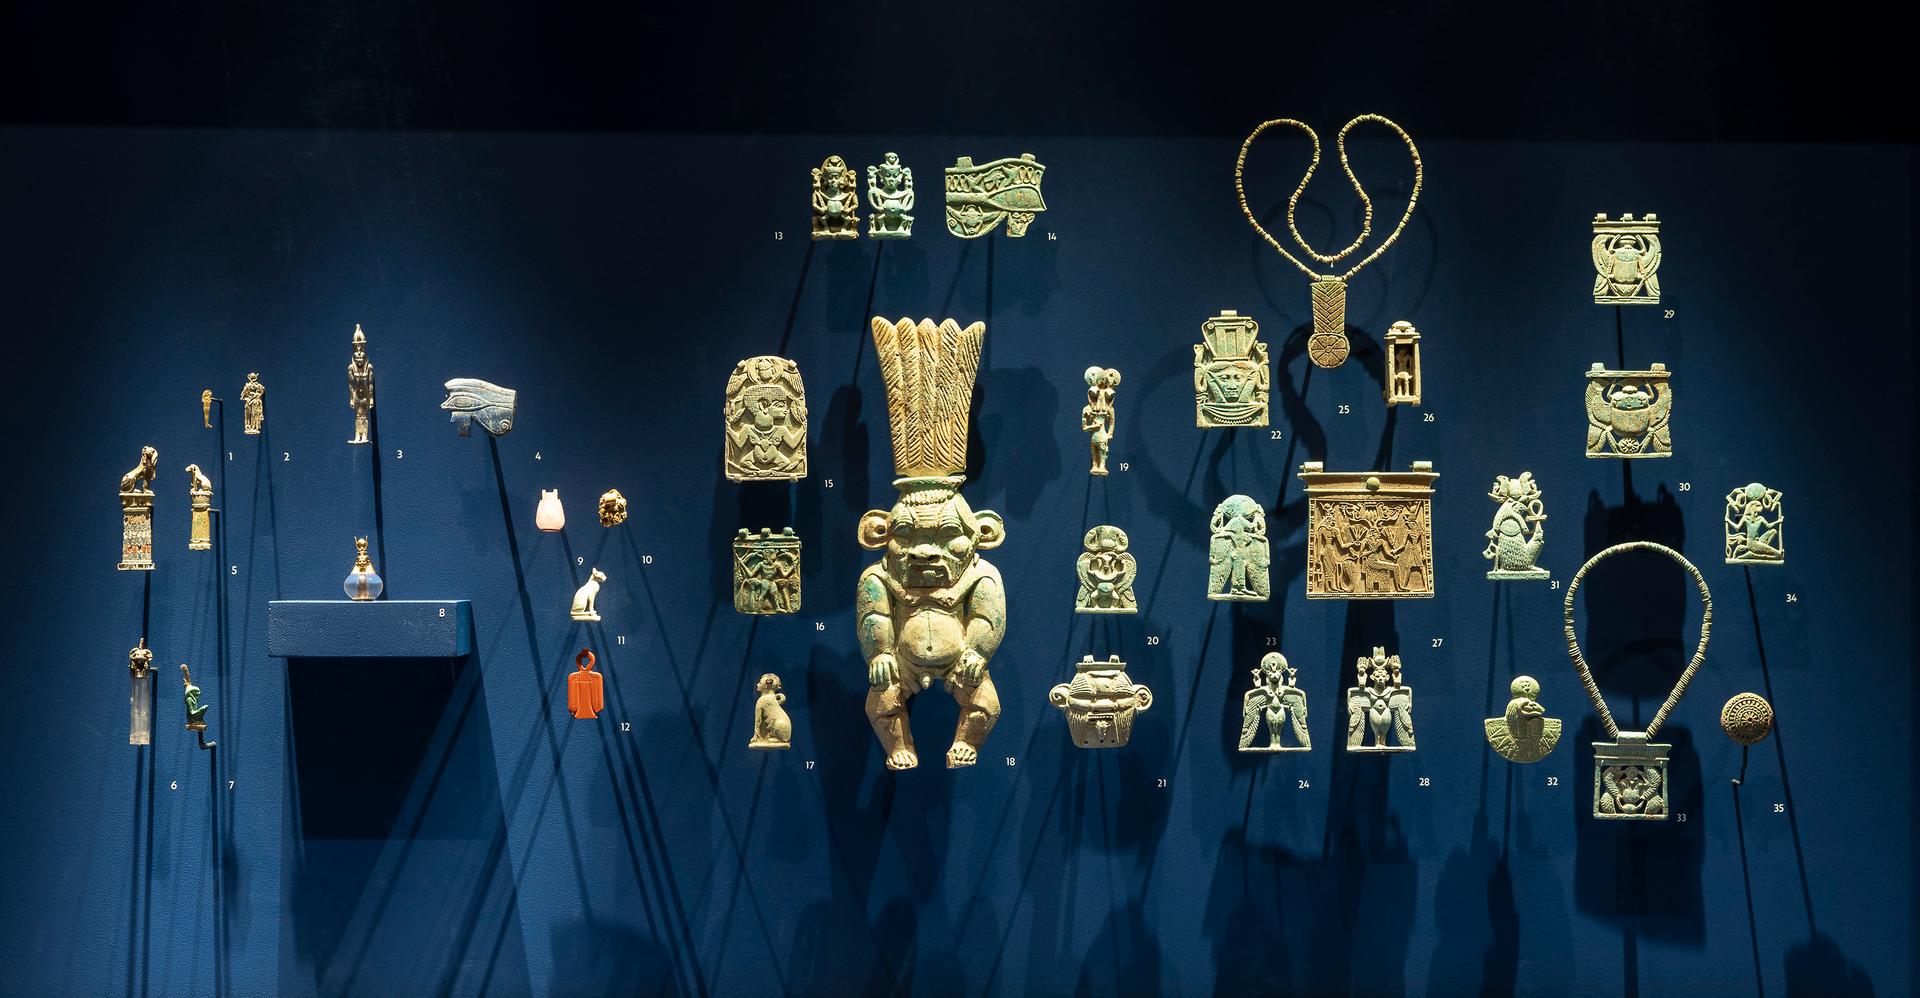 Ancient Nubia Now exhibition at the Museum of Fine Arts, Boston. October 13, 2019 to January 20, 2020